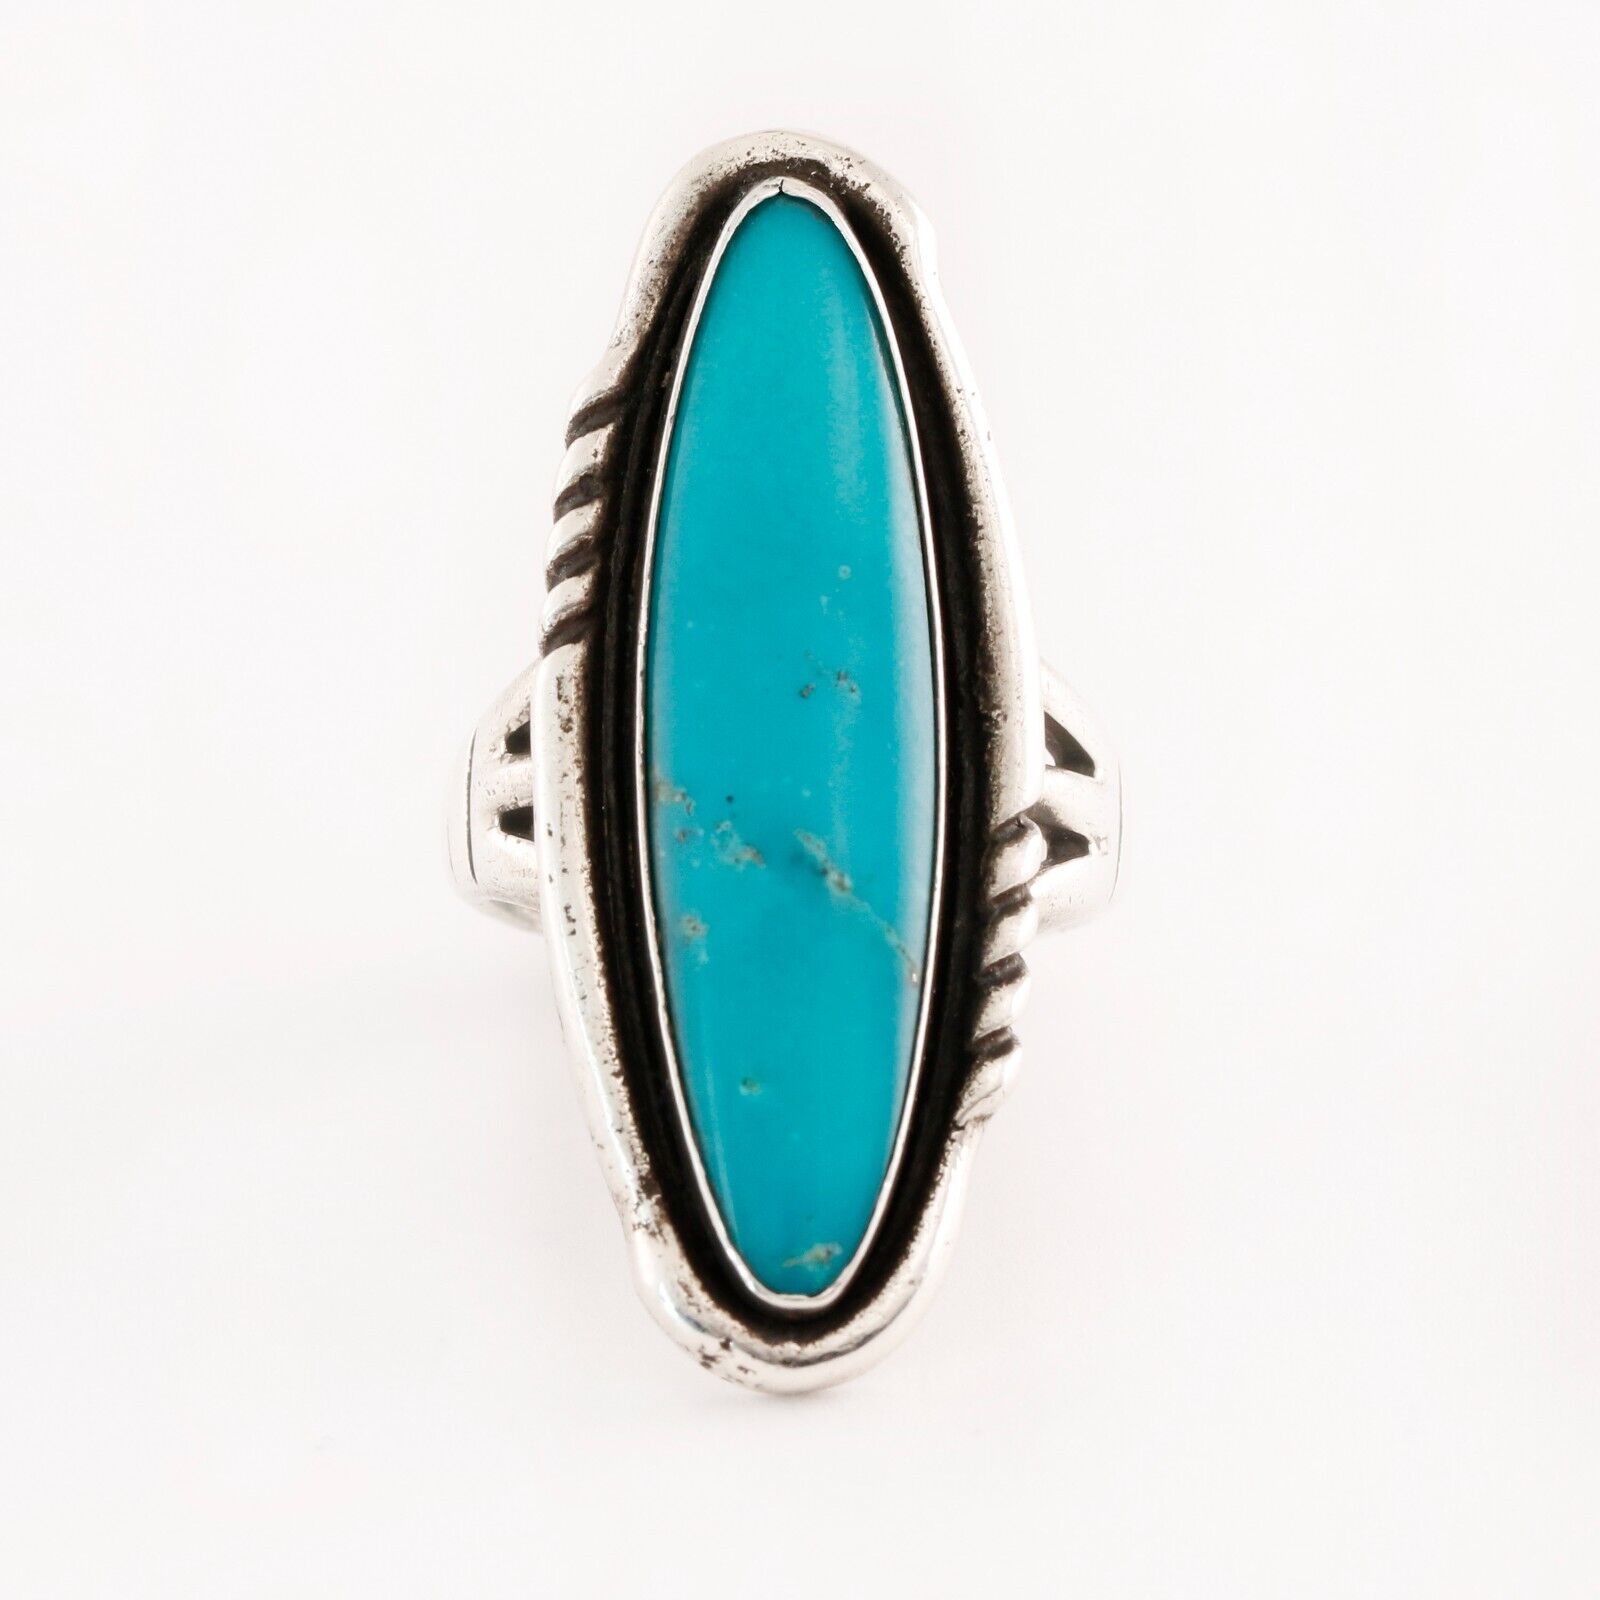 BELL TRADING POST STERLING SILVER BLUE TURQUOISE STAMPED RING 4.75